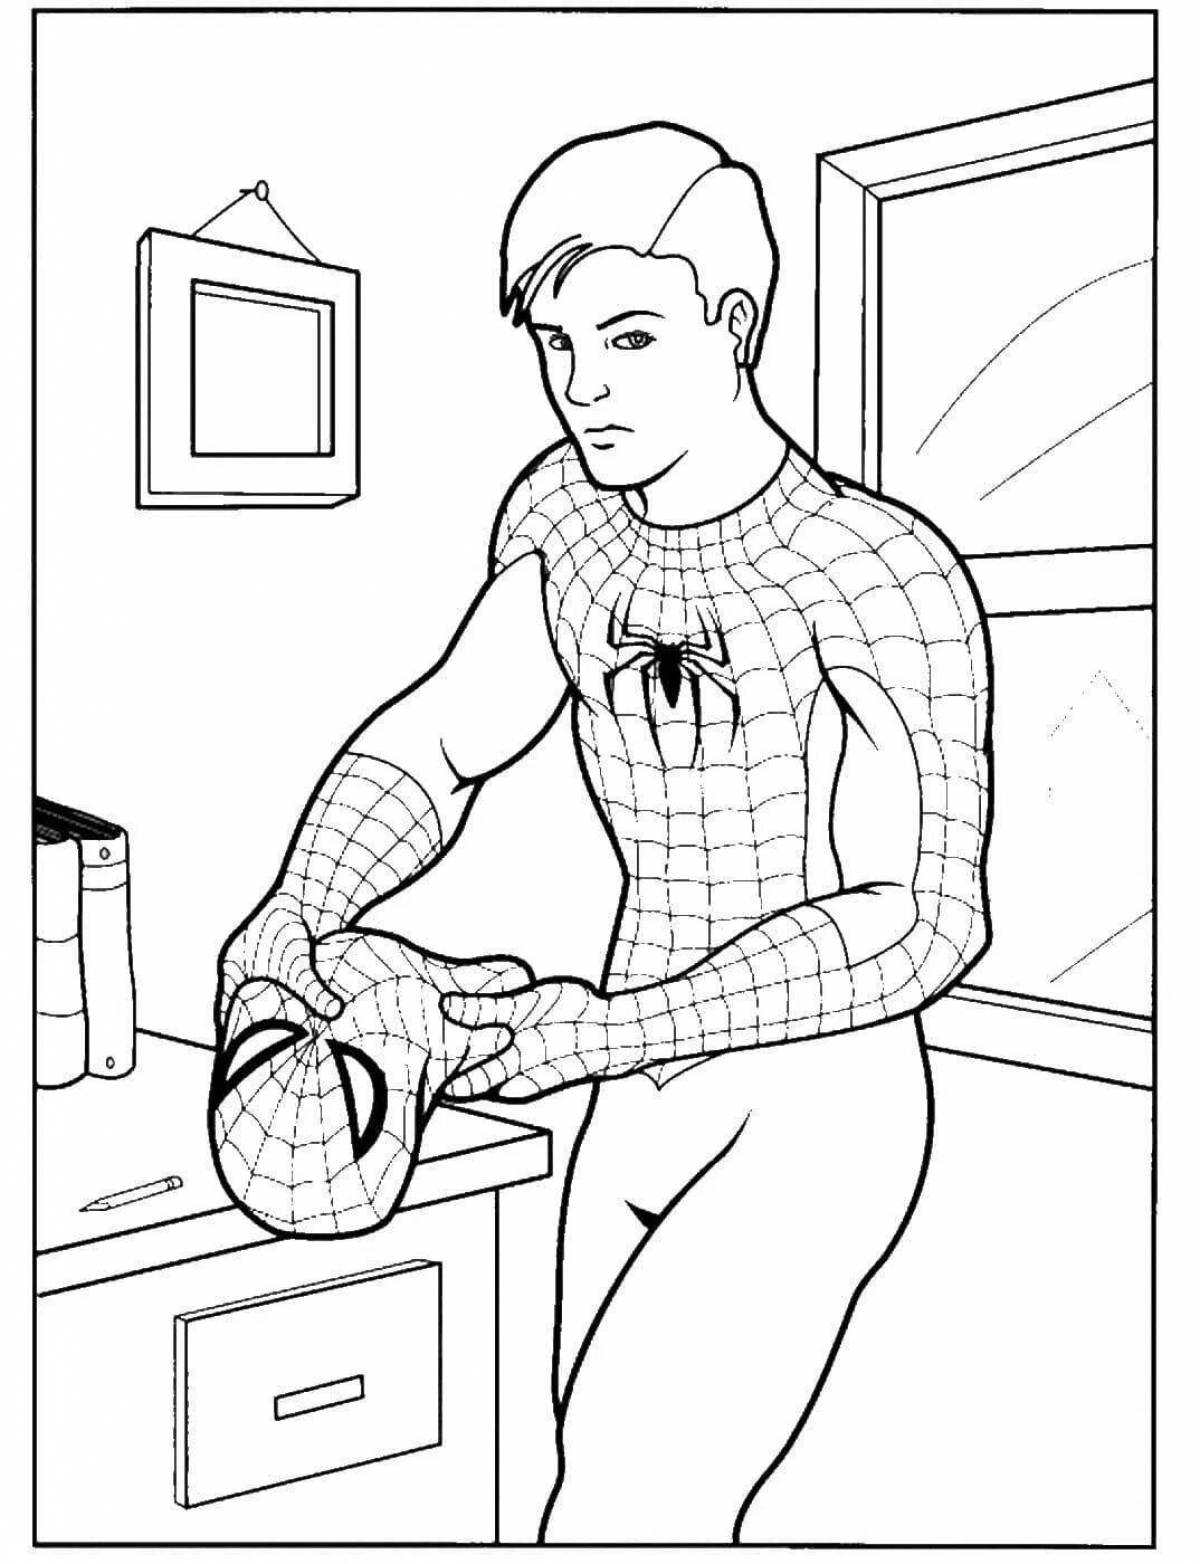 Tobey maguire spiderman mystery coloring book